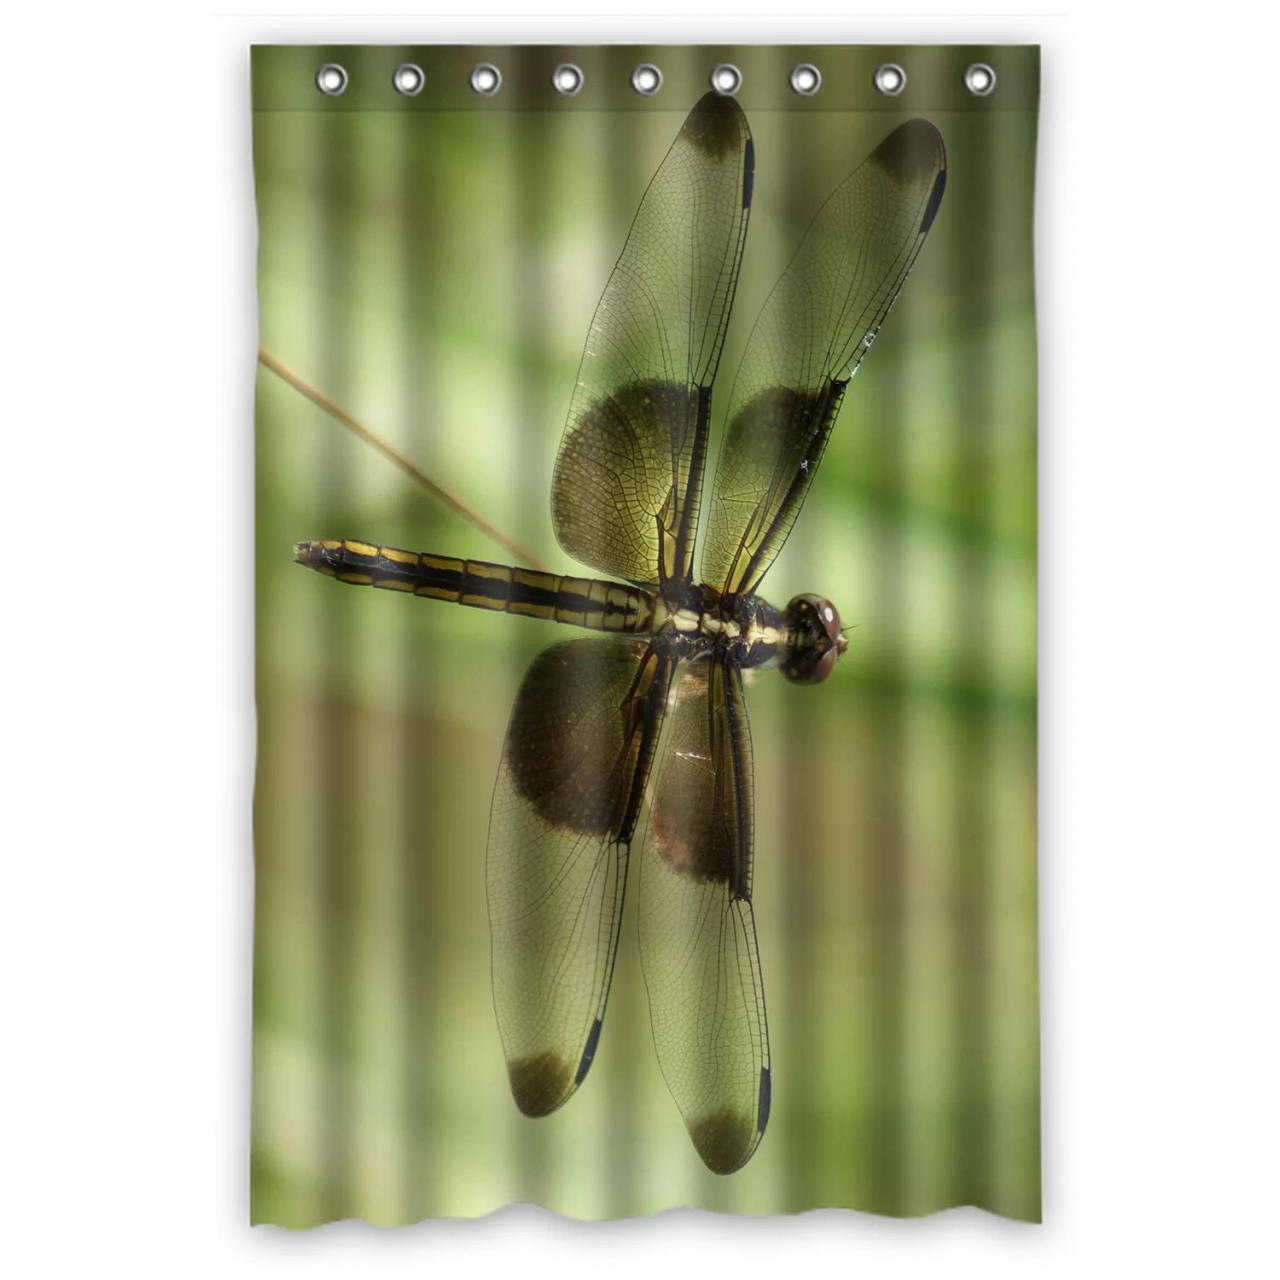 ZKGK Dragonfly Waterproof Shower Curtain Bathroom Decor Sets with Hooks